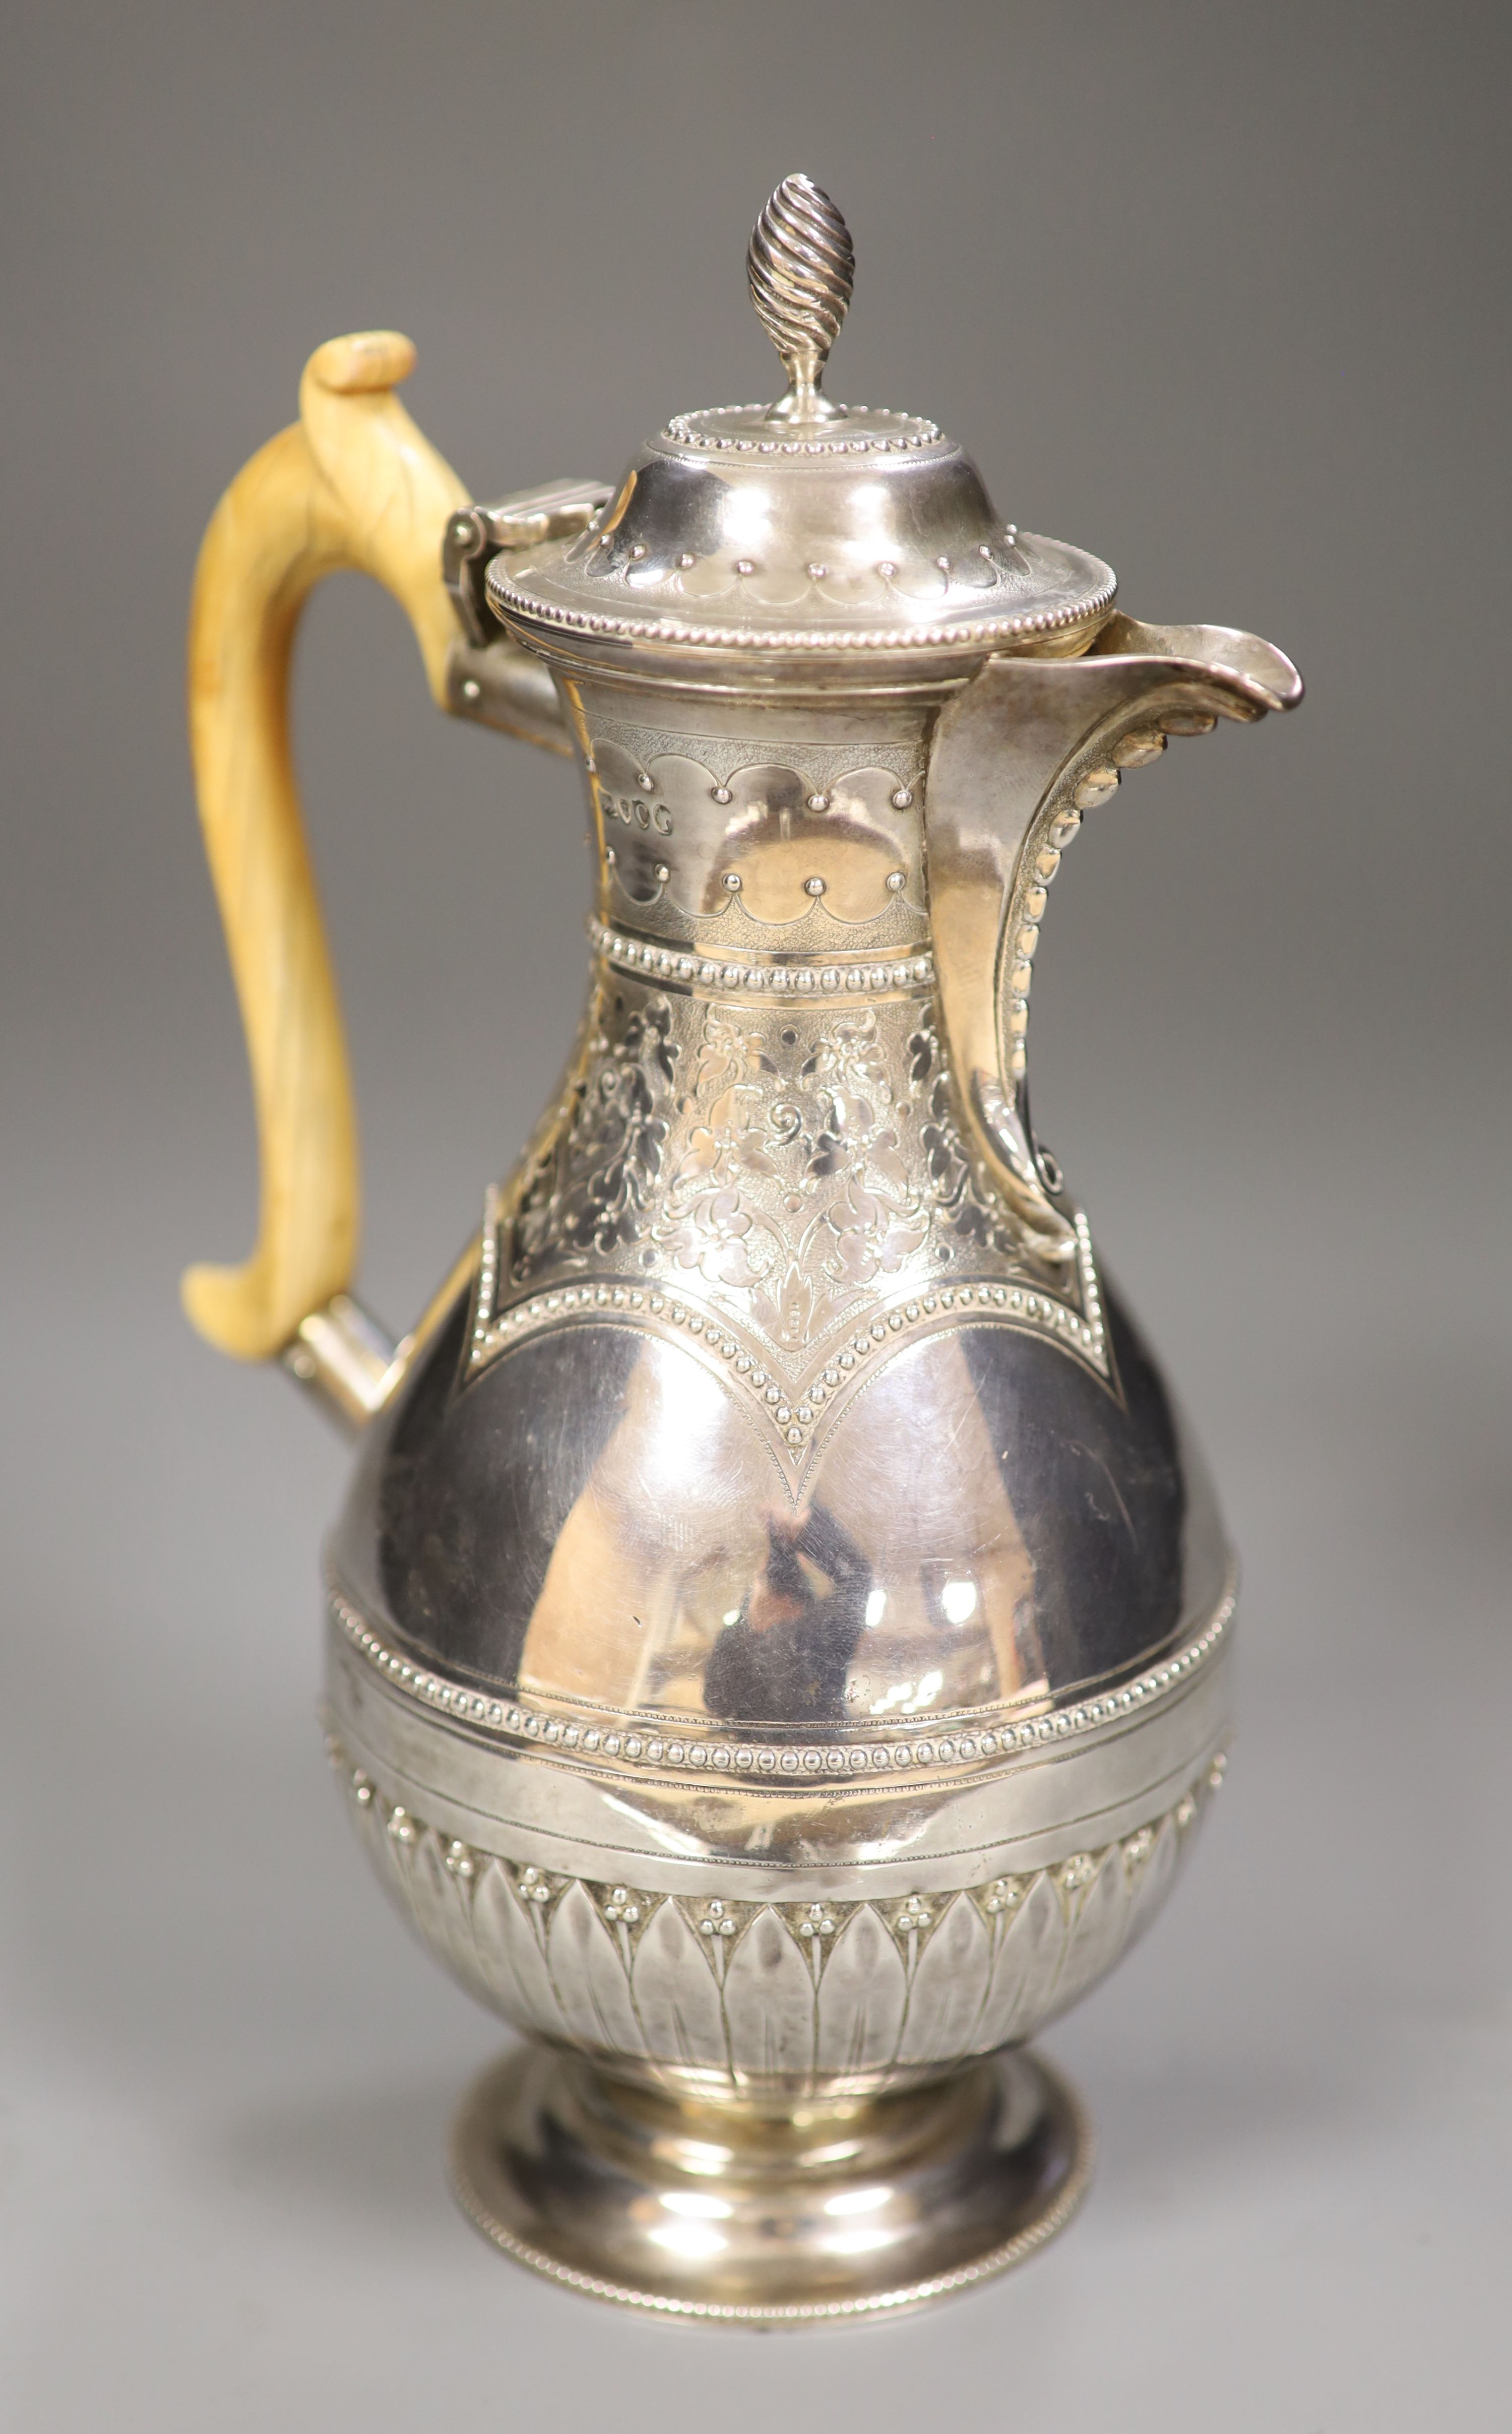 A Victorian silver baluster hot water pot, Henry Holland, London, 1878, with ivory handle, height 23.8cm, gross 15oz.